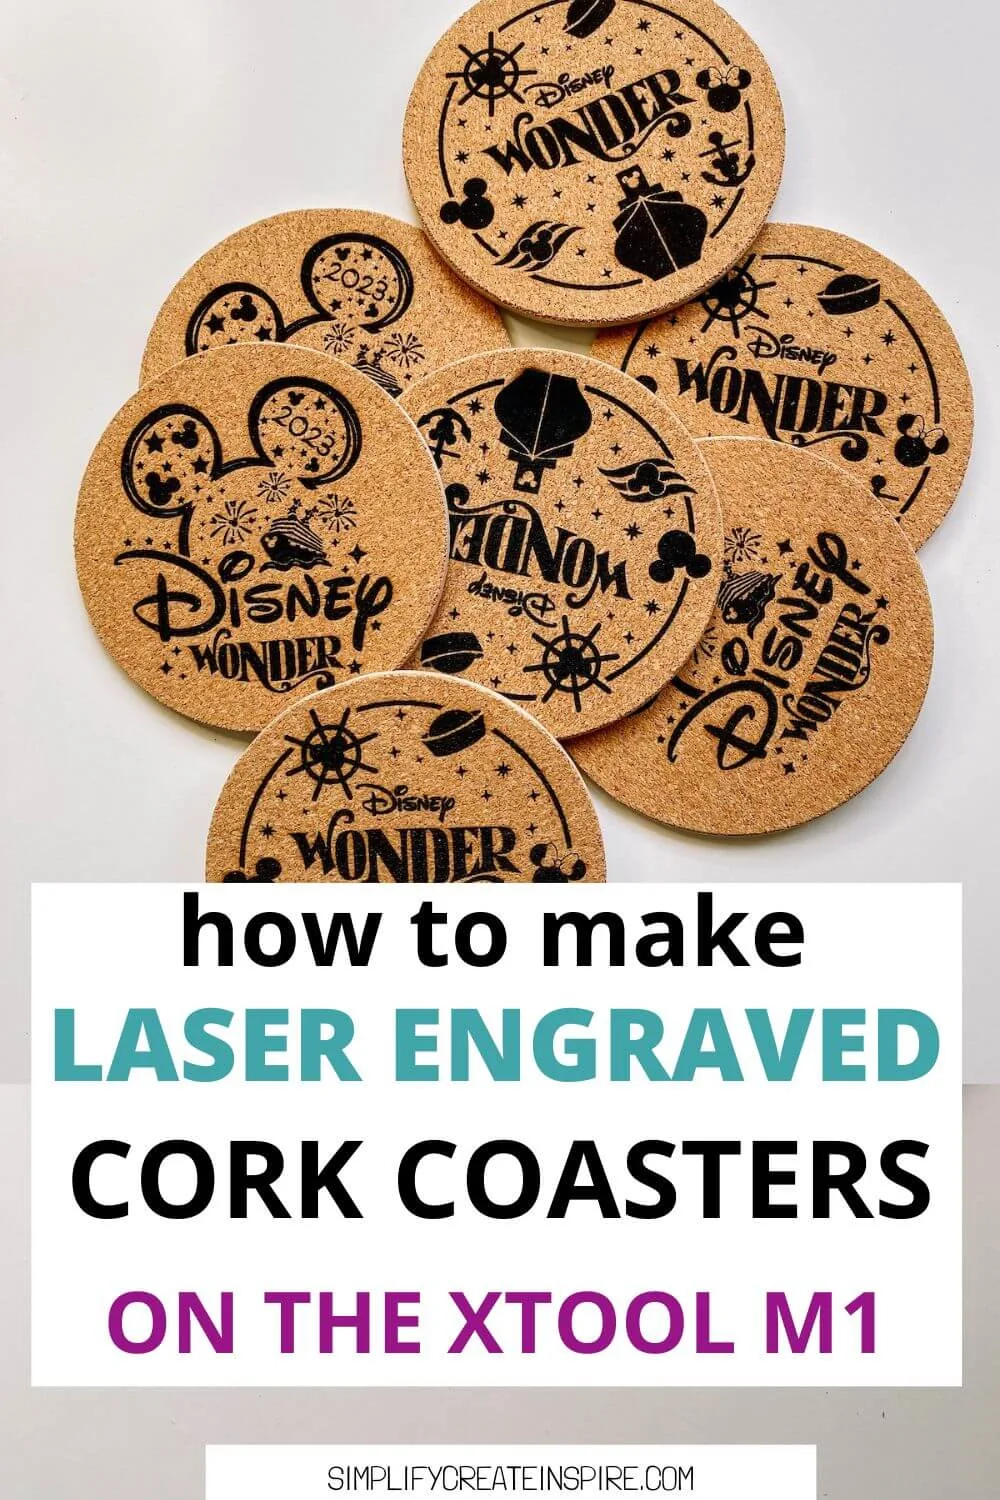 How to make diy laser engraved cork coasters on the xtool m1.